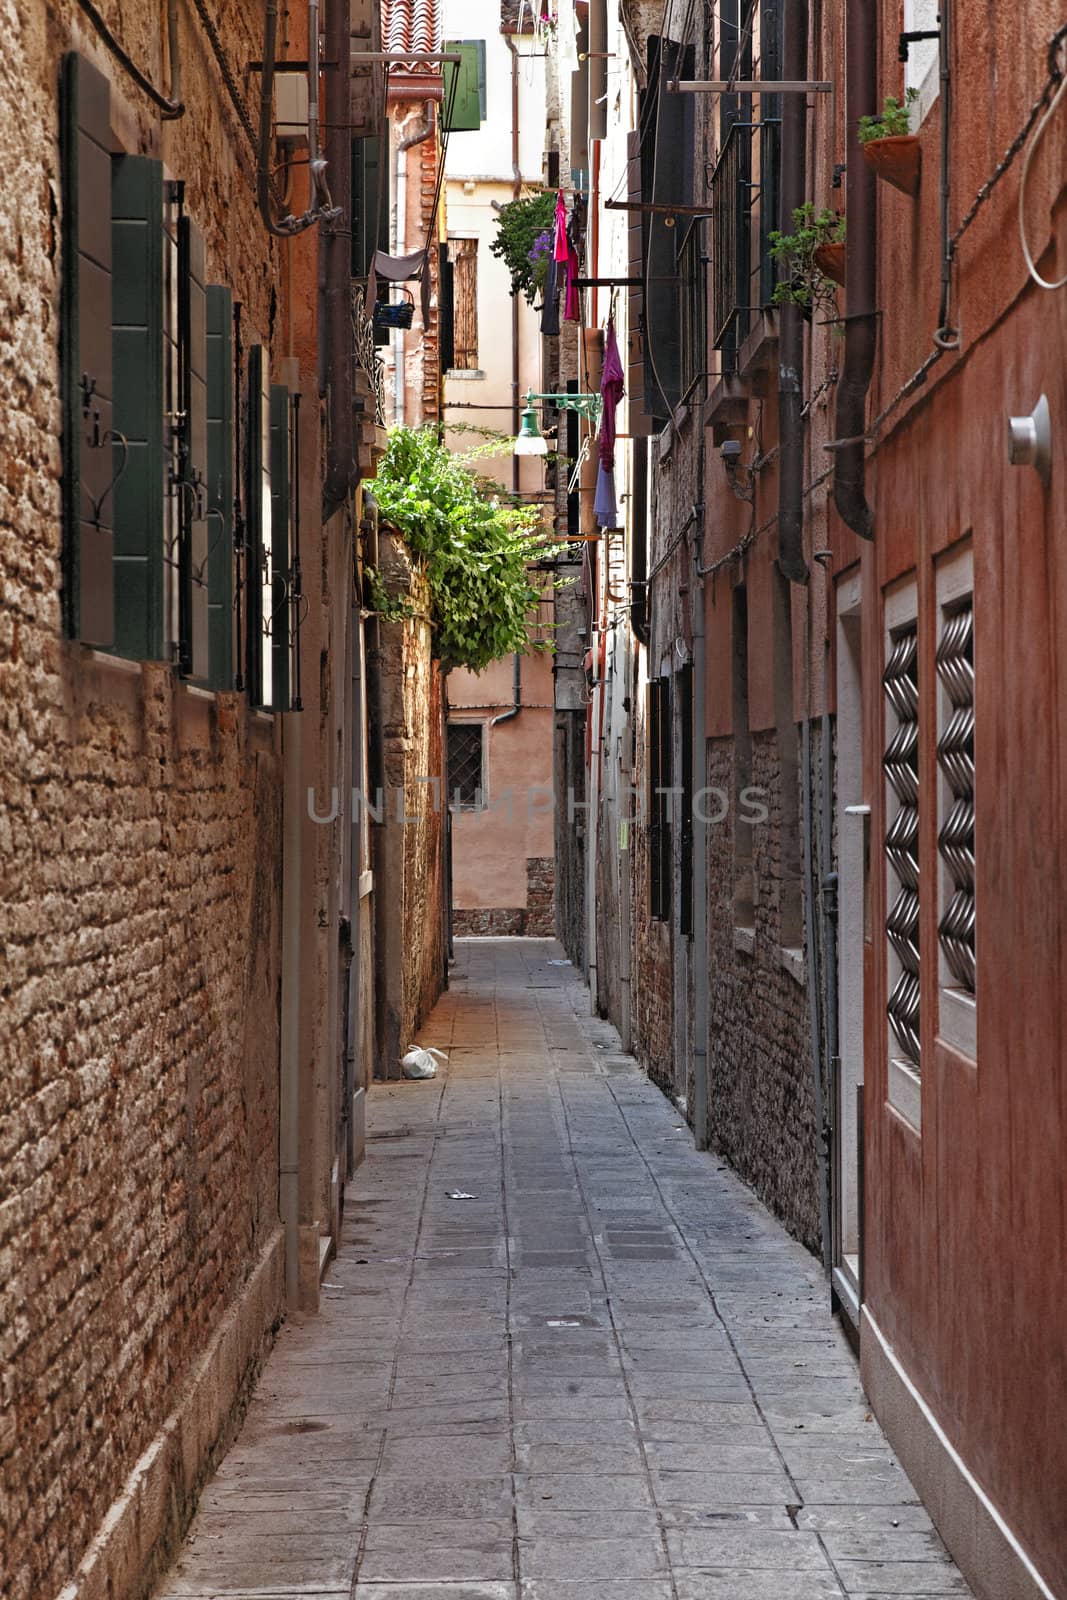 Image of a typical narrow street between walls of houses in Venice.